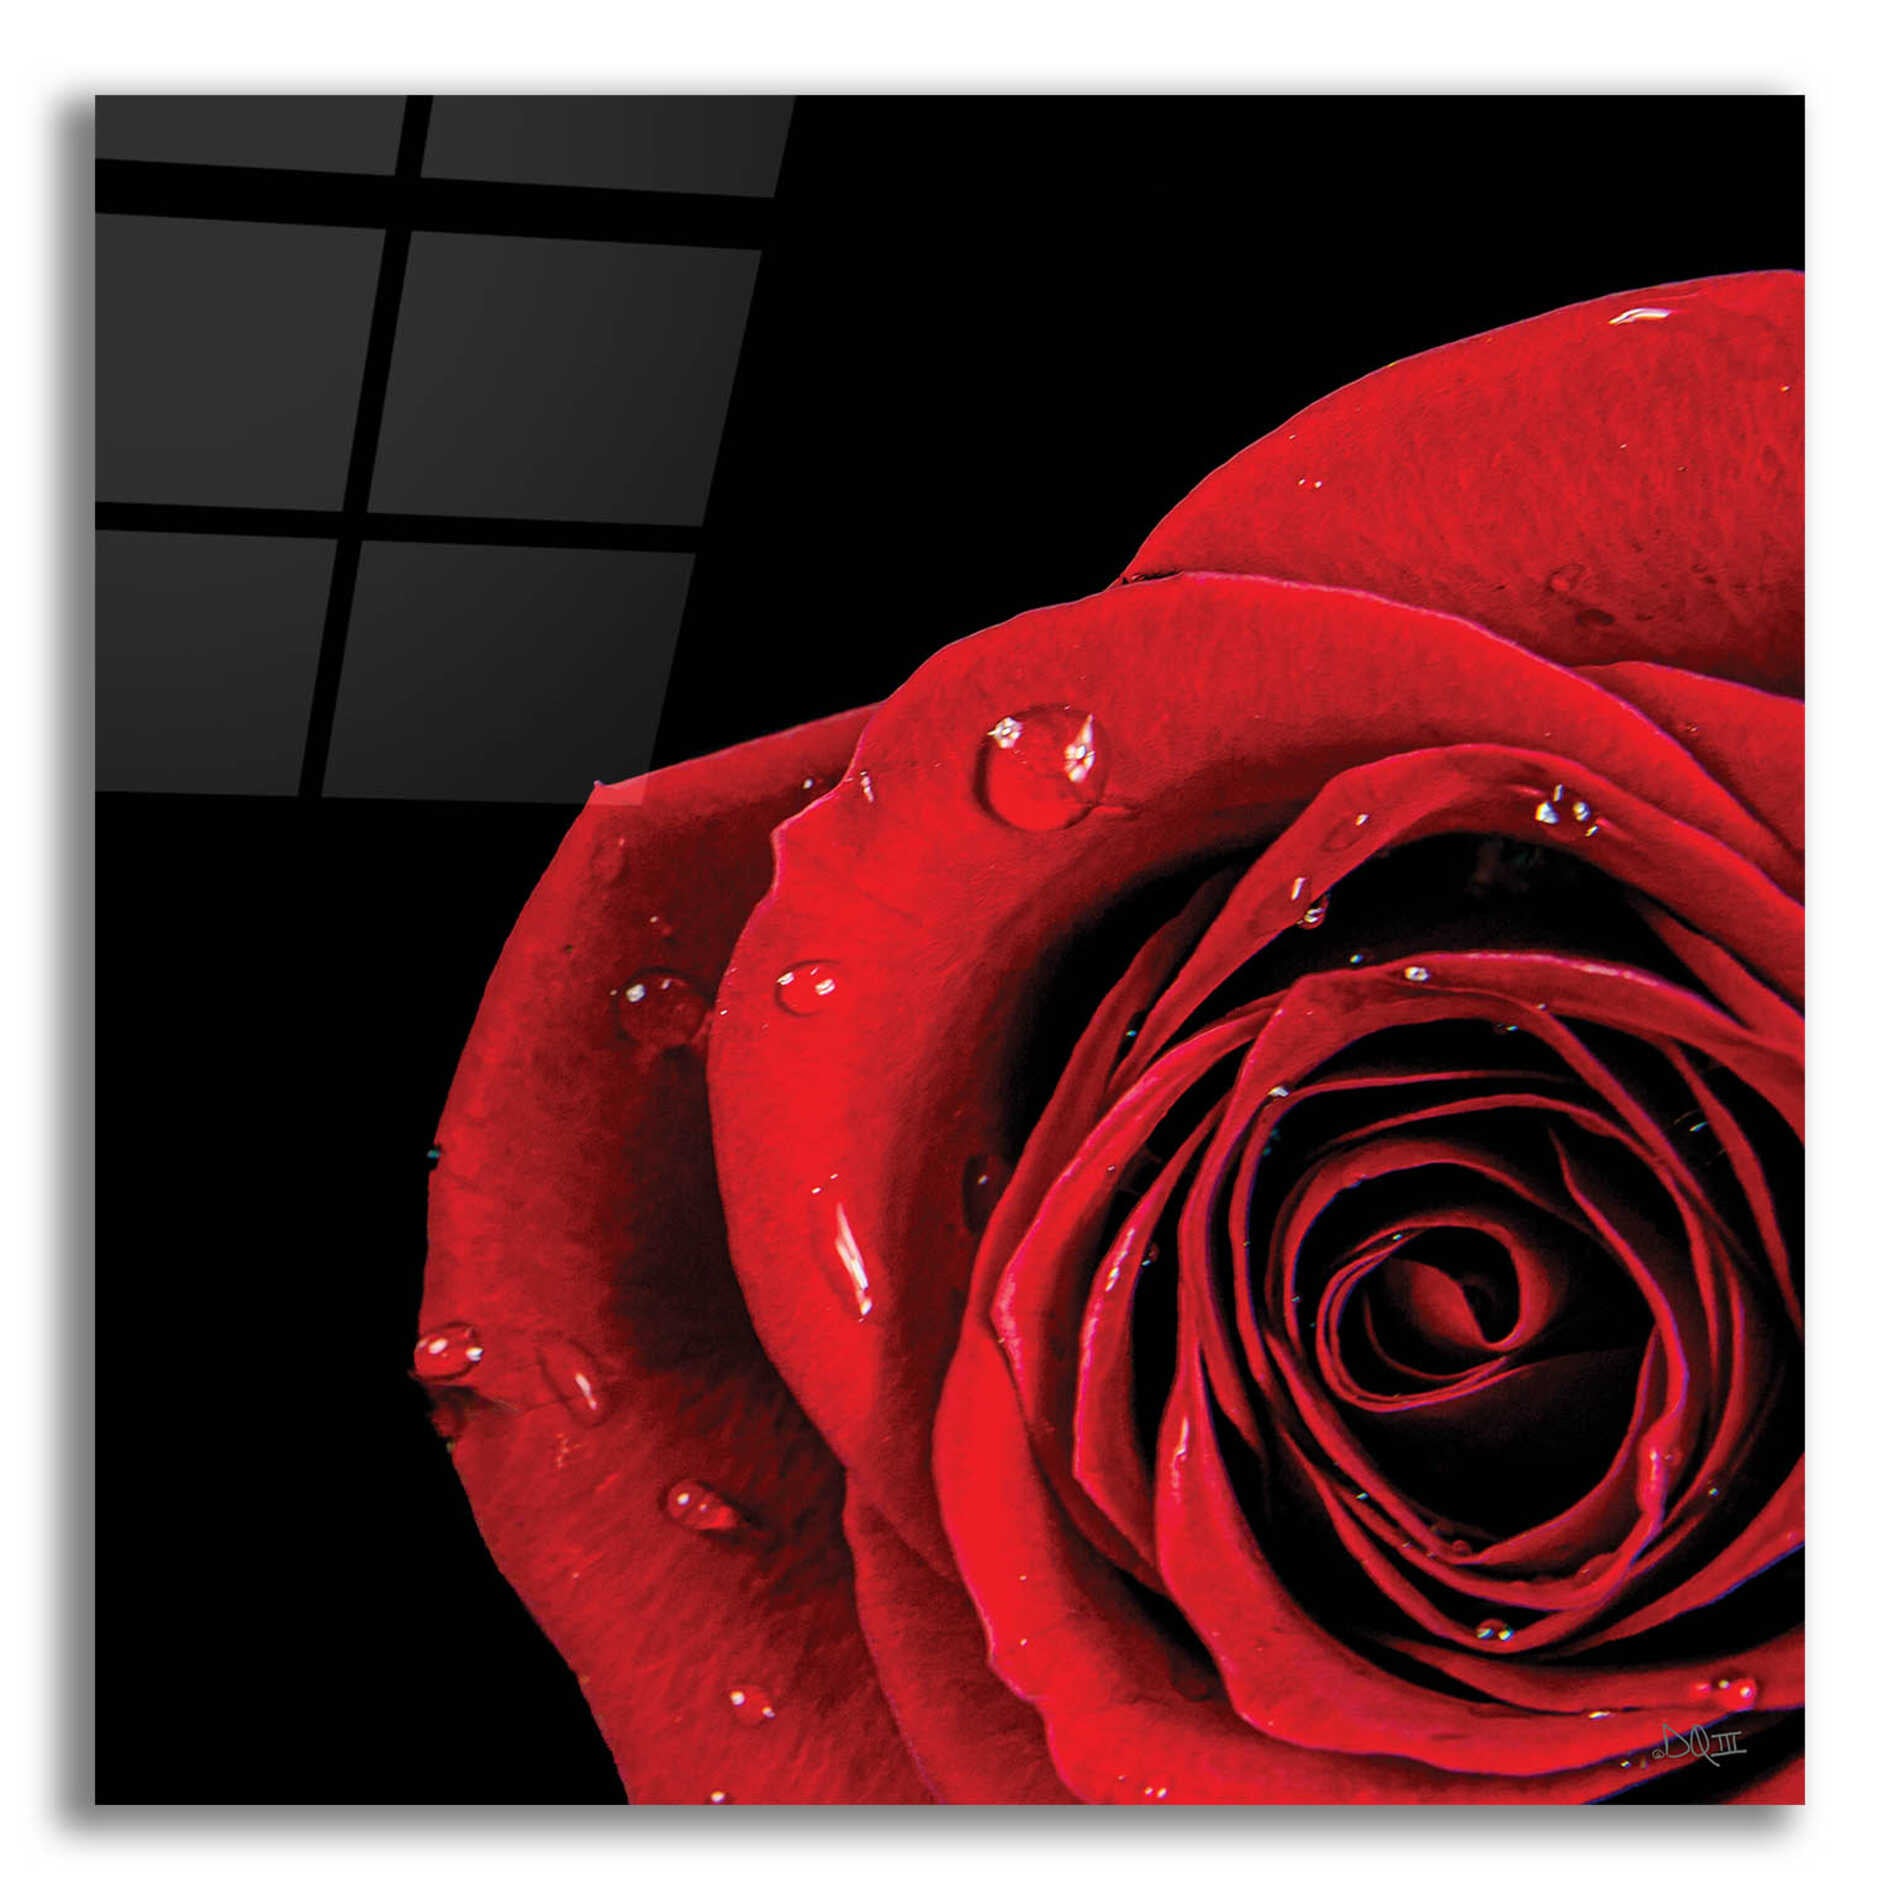 Epic Art 'Pop of Red Rose' by Donnie Quillen, Acrylic Glass Wall Art,12x12